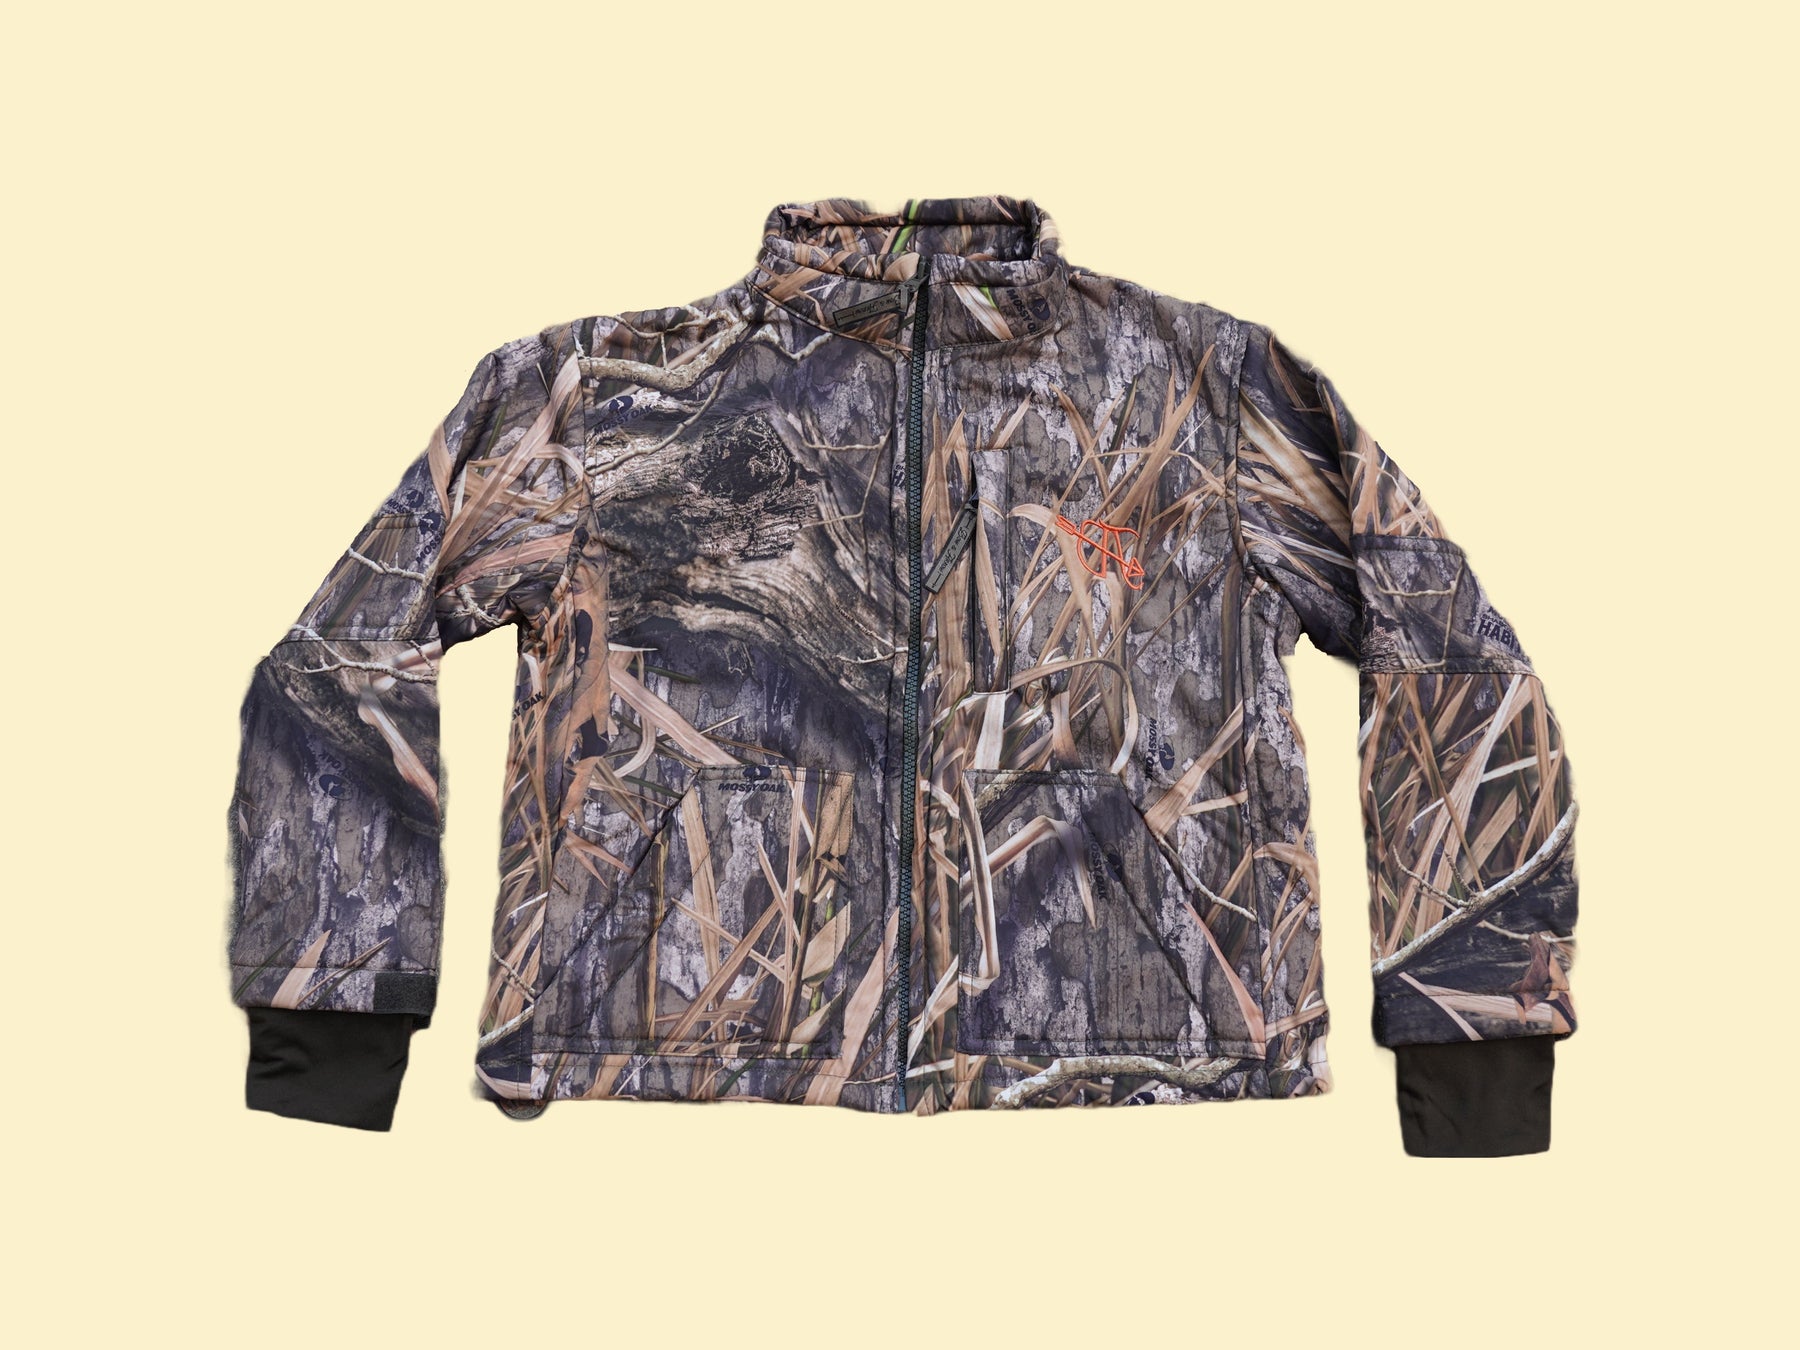 Medium Weight Hunting Jacket by Bow and Arrow Outdoors - Sportsman Gear